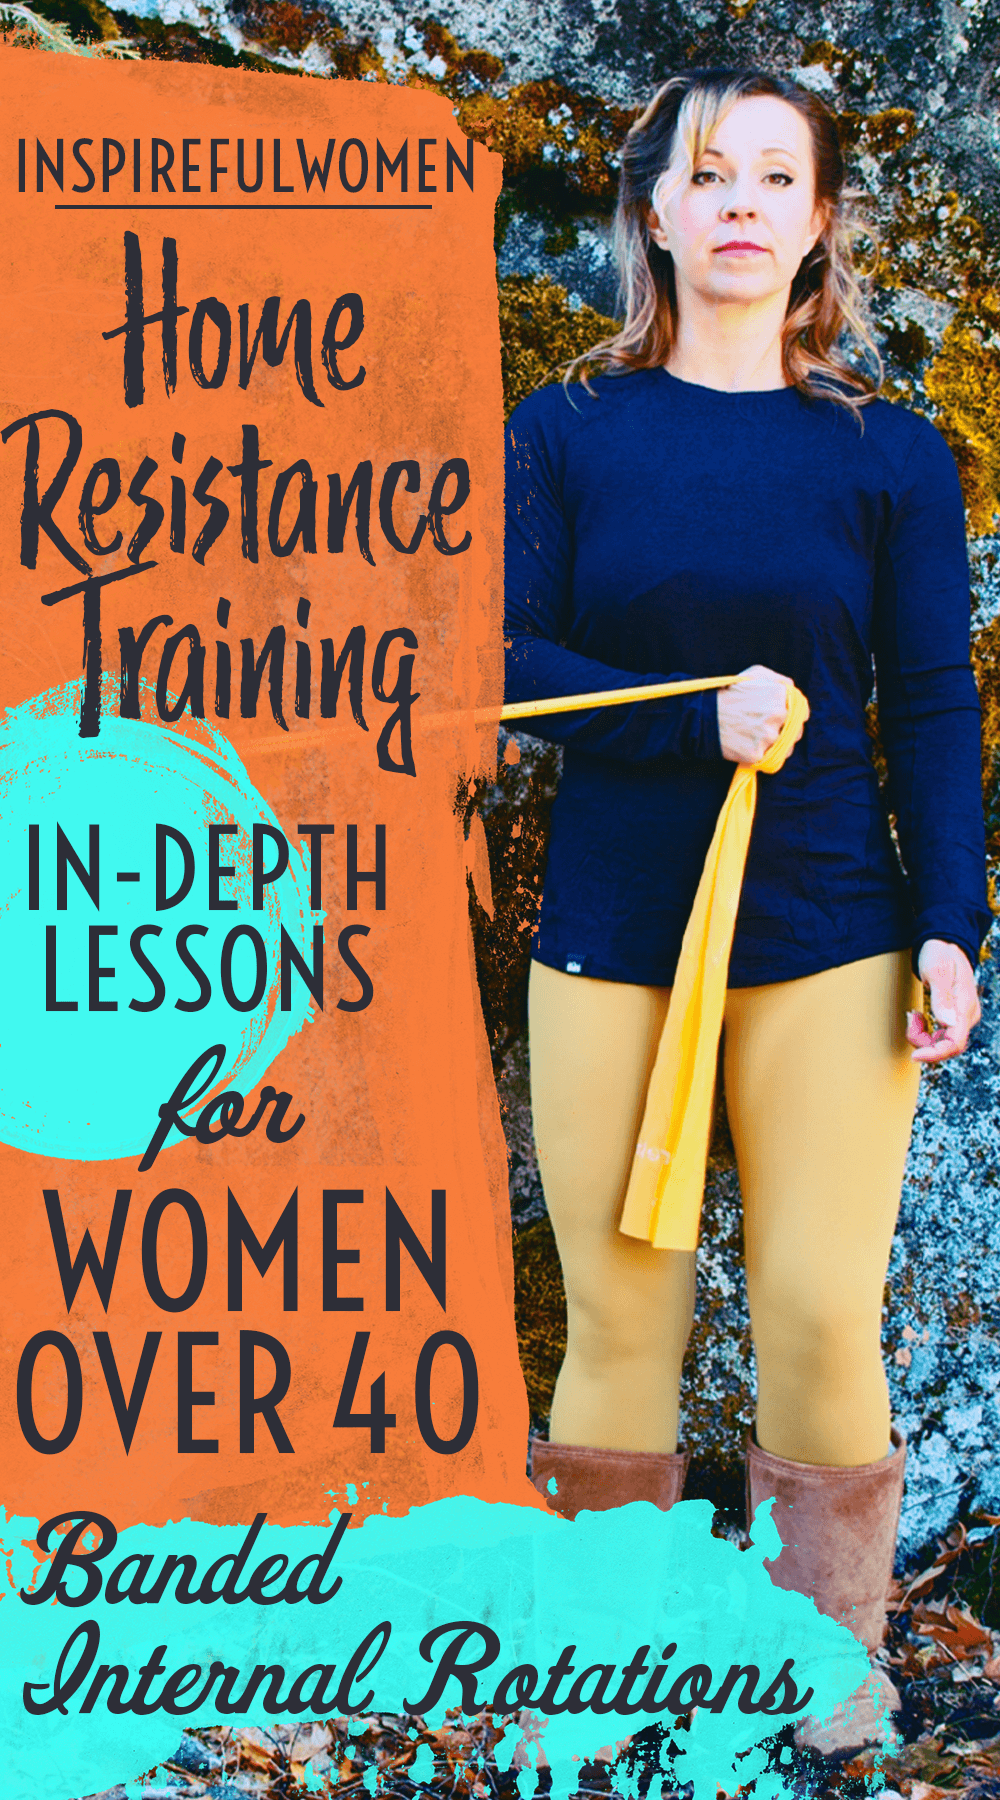 internal-rotation-single-arm-anchored-band-resistance-training-home-lessons-women-over-40